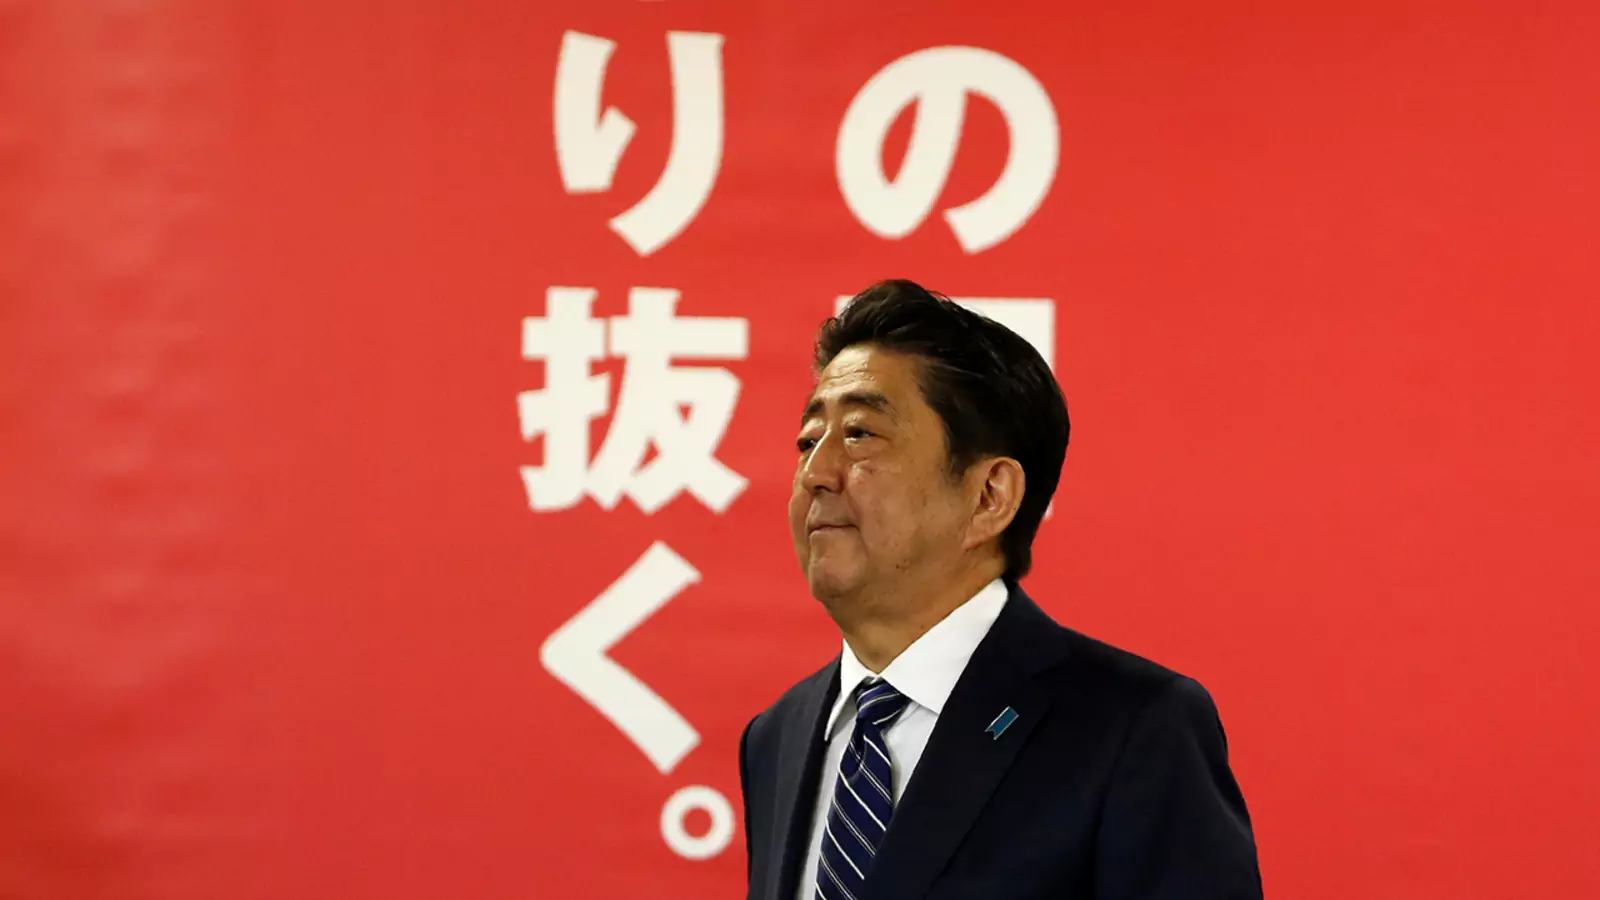 Japan's Prime Minister Shinzo Abe, who is also leader of the Liberal Democratic Party, attends a news conference in Tokyo, October 23, 2017. 